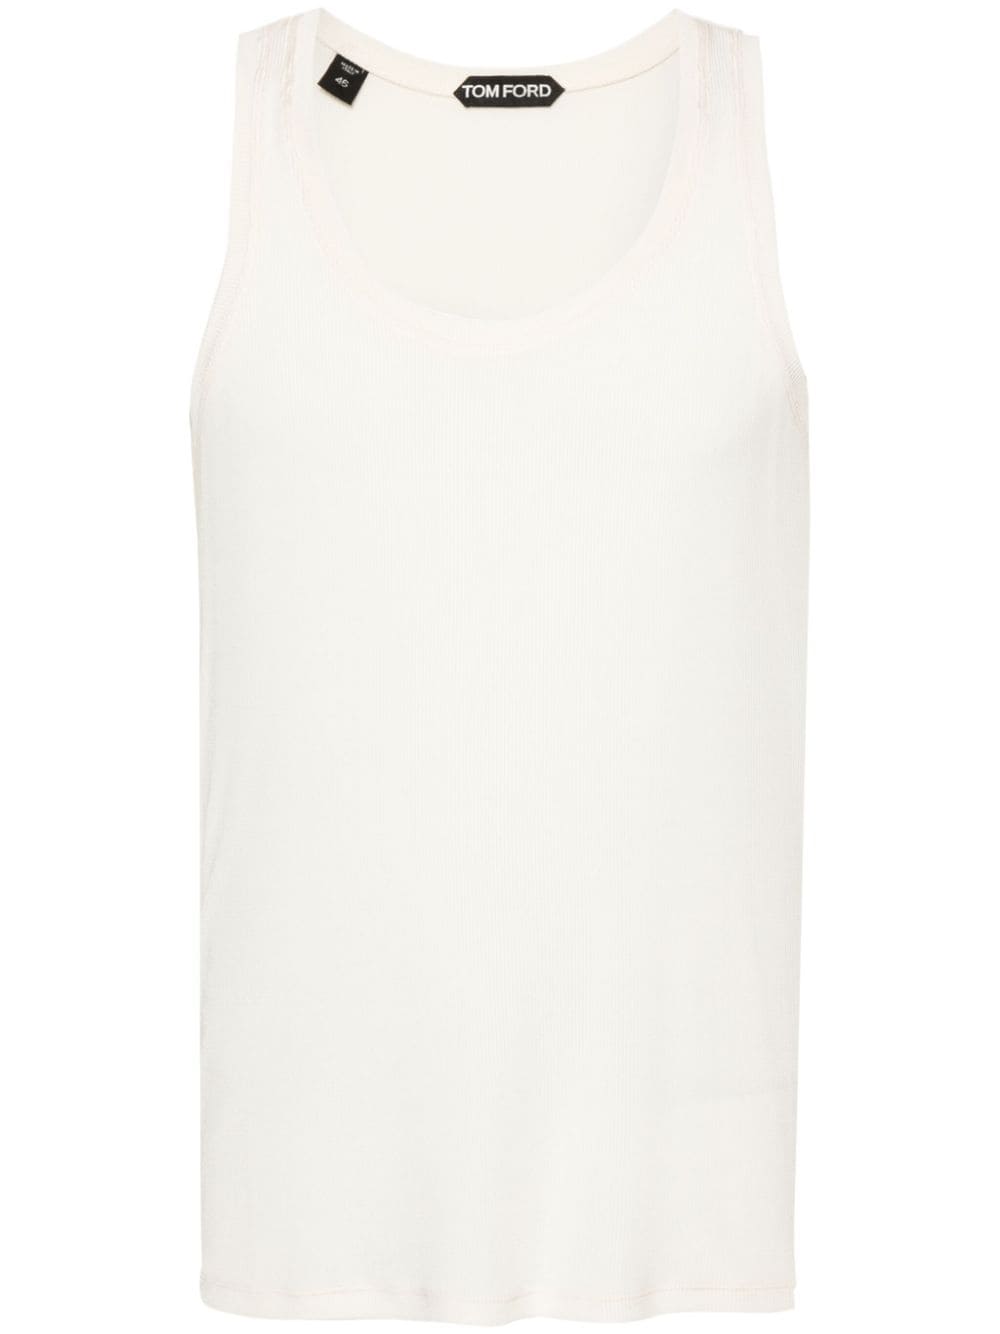 TOM FORD ribbed tank top - White von TOM FORD